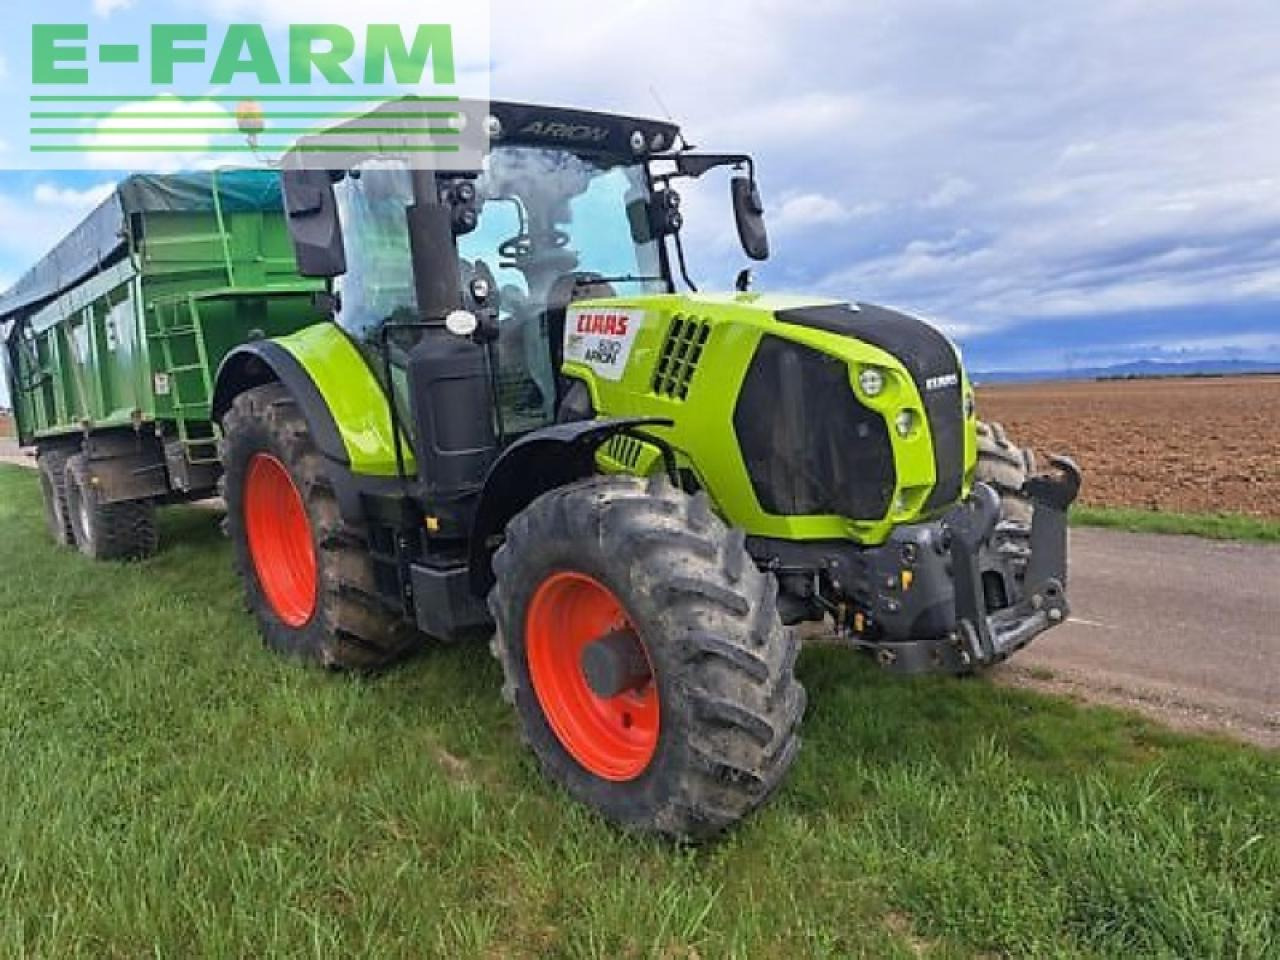 Tracteur agricole CLAAS arion 630 cmatic: photos 4